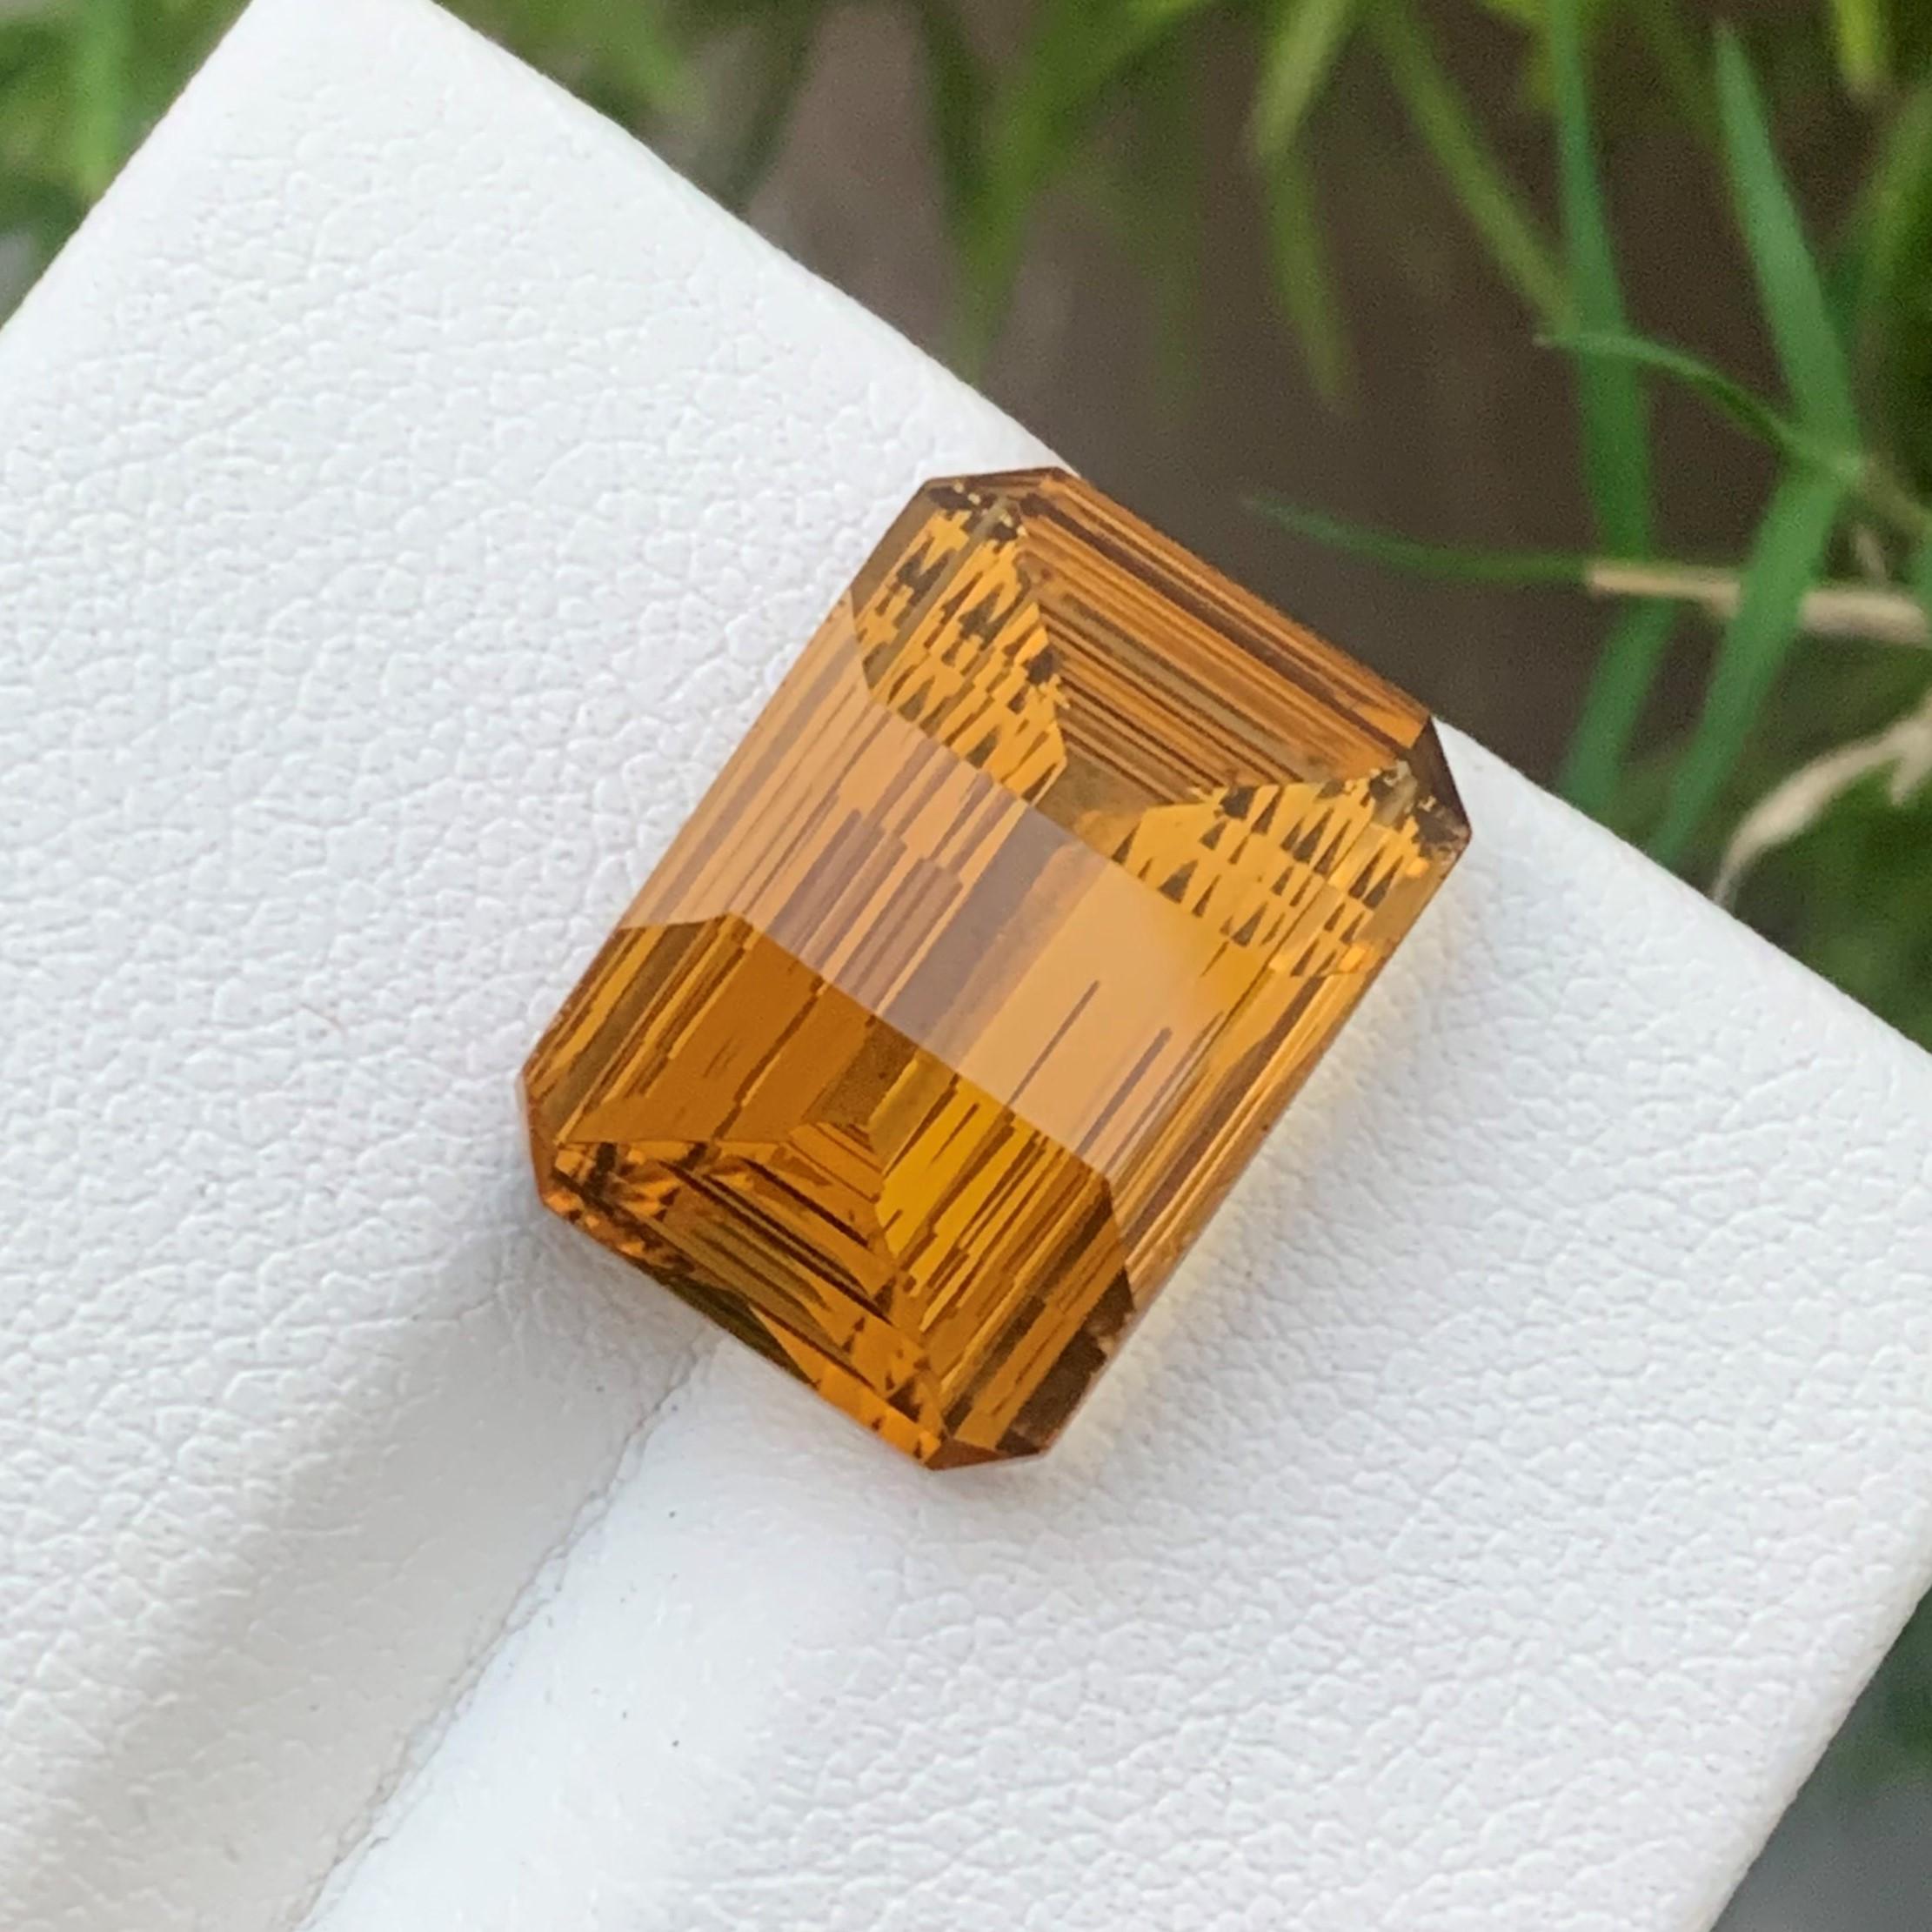 Faceted Yellow Citrine
Weight : 10.20 Carats
Dimensions : 16.5x11.8x7.9 Mm
Clarity : Eye Clean 
Origin : Brazil
Color: Yellow
Shape: Emerald Pixel Cut
Certificate: On Demand
Month: November
.
The Many Healing Properties of Citrine
Increase Optimism,